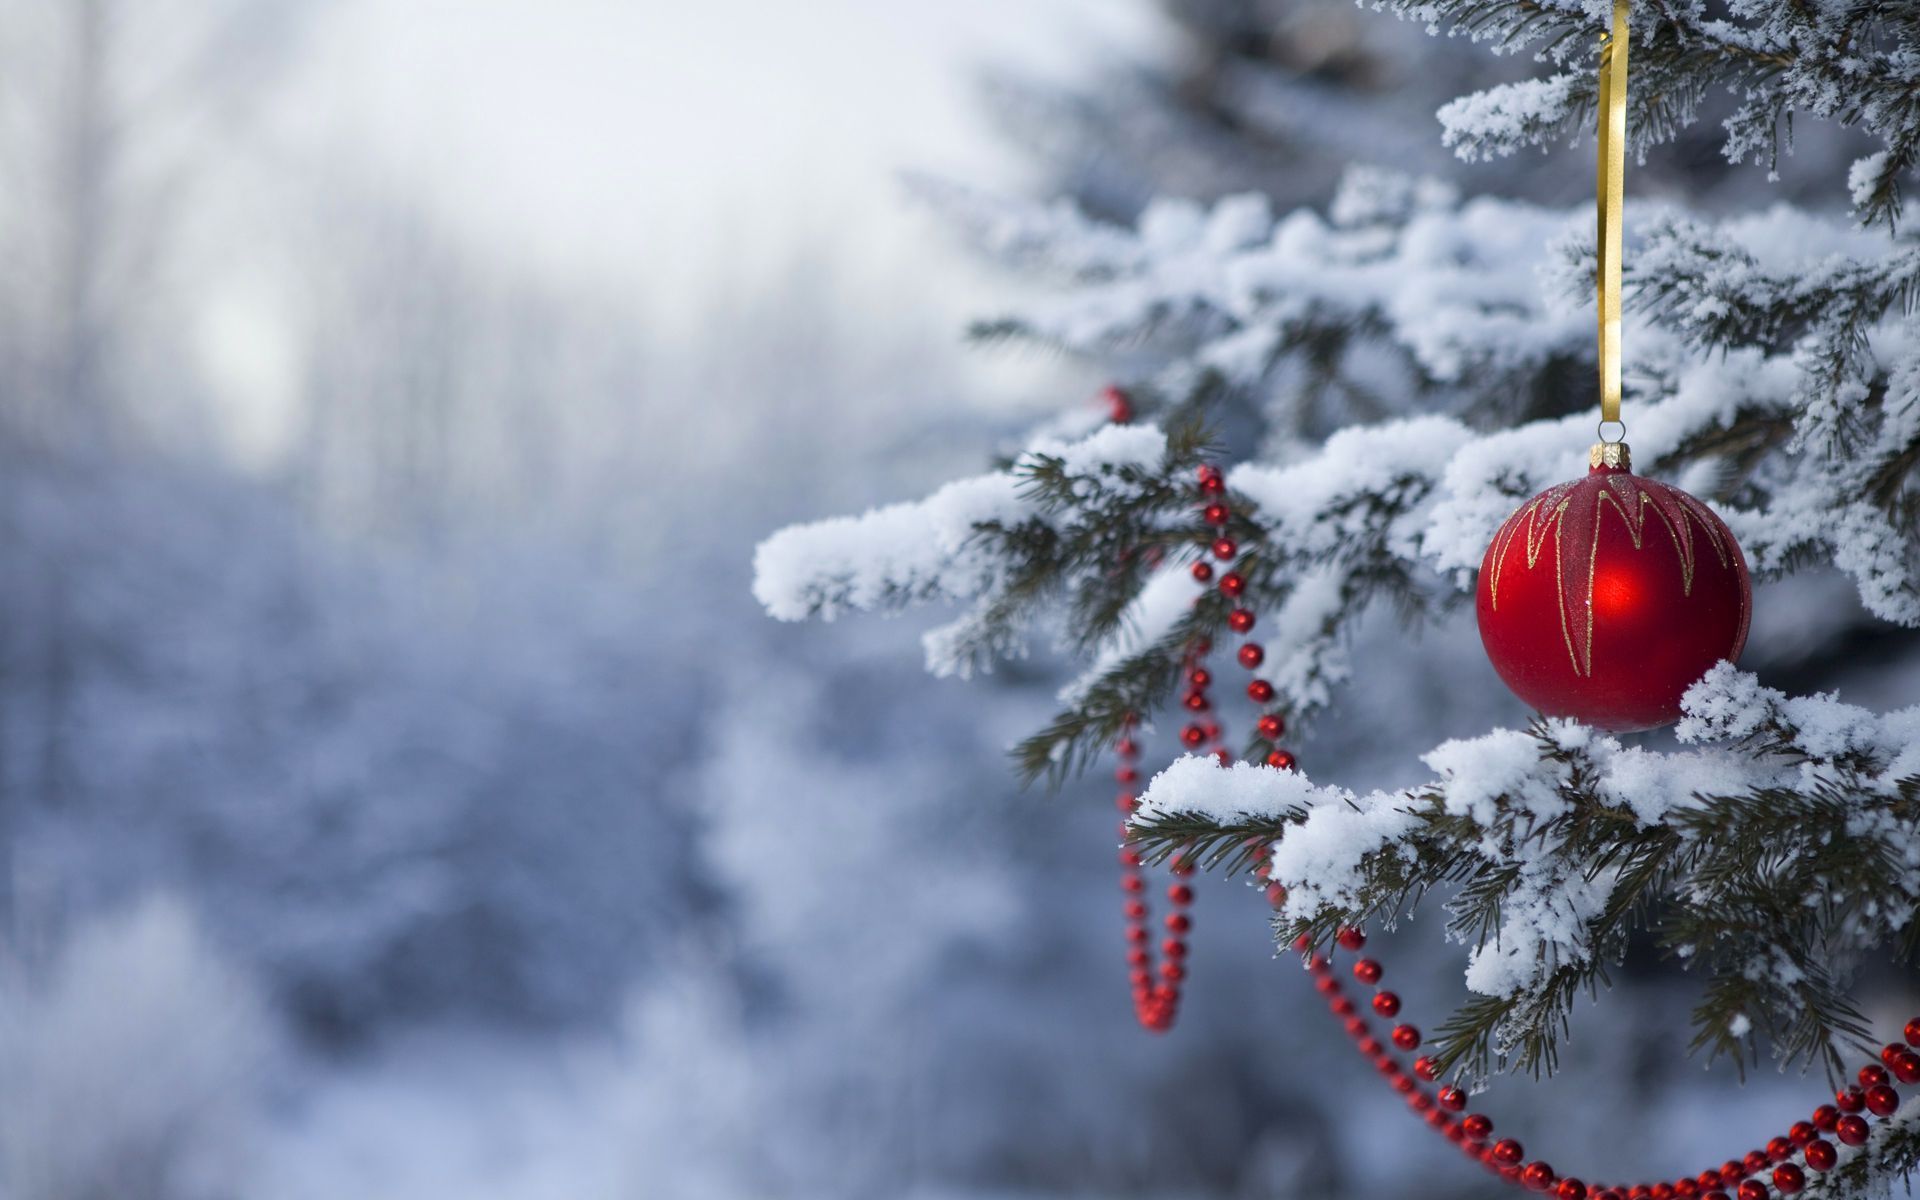 Winter and Christmas desktop backgrounds | HD Wallpapers